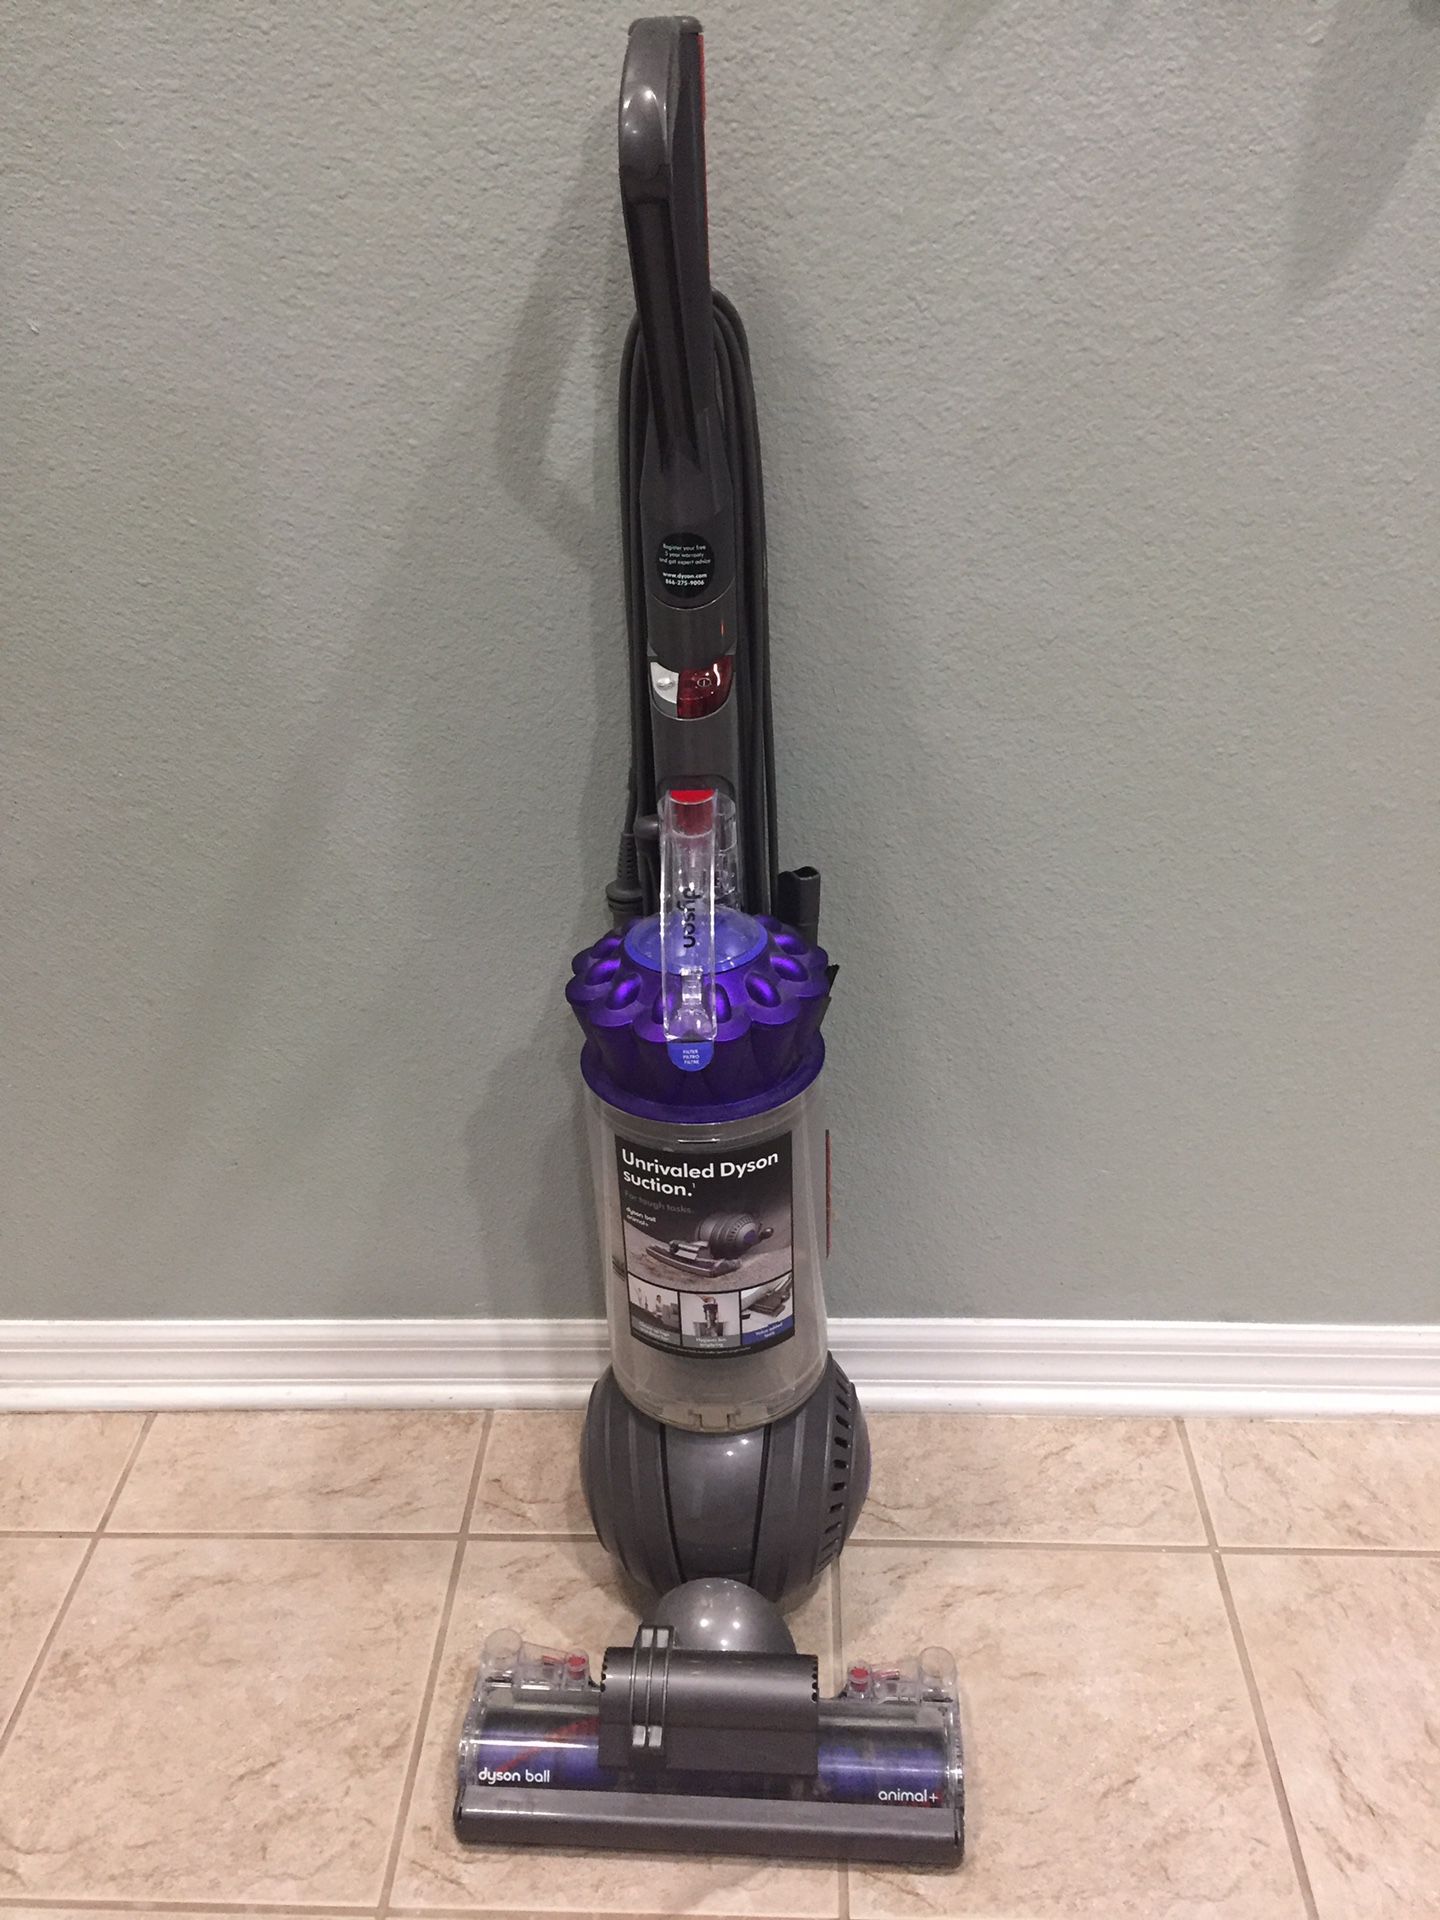 Dyson vacuum - moving into a tiny house so this won’t be needed